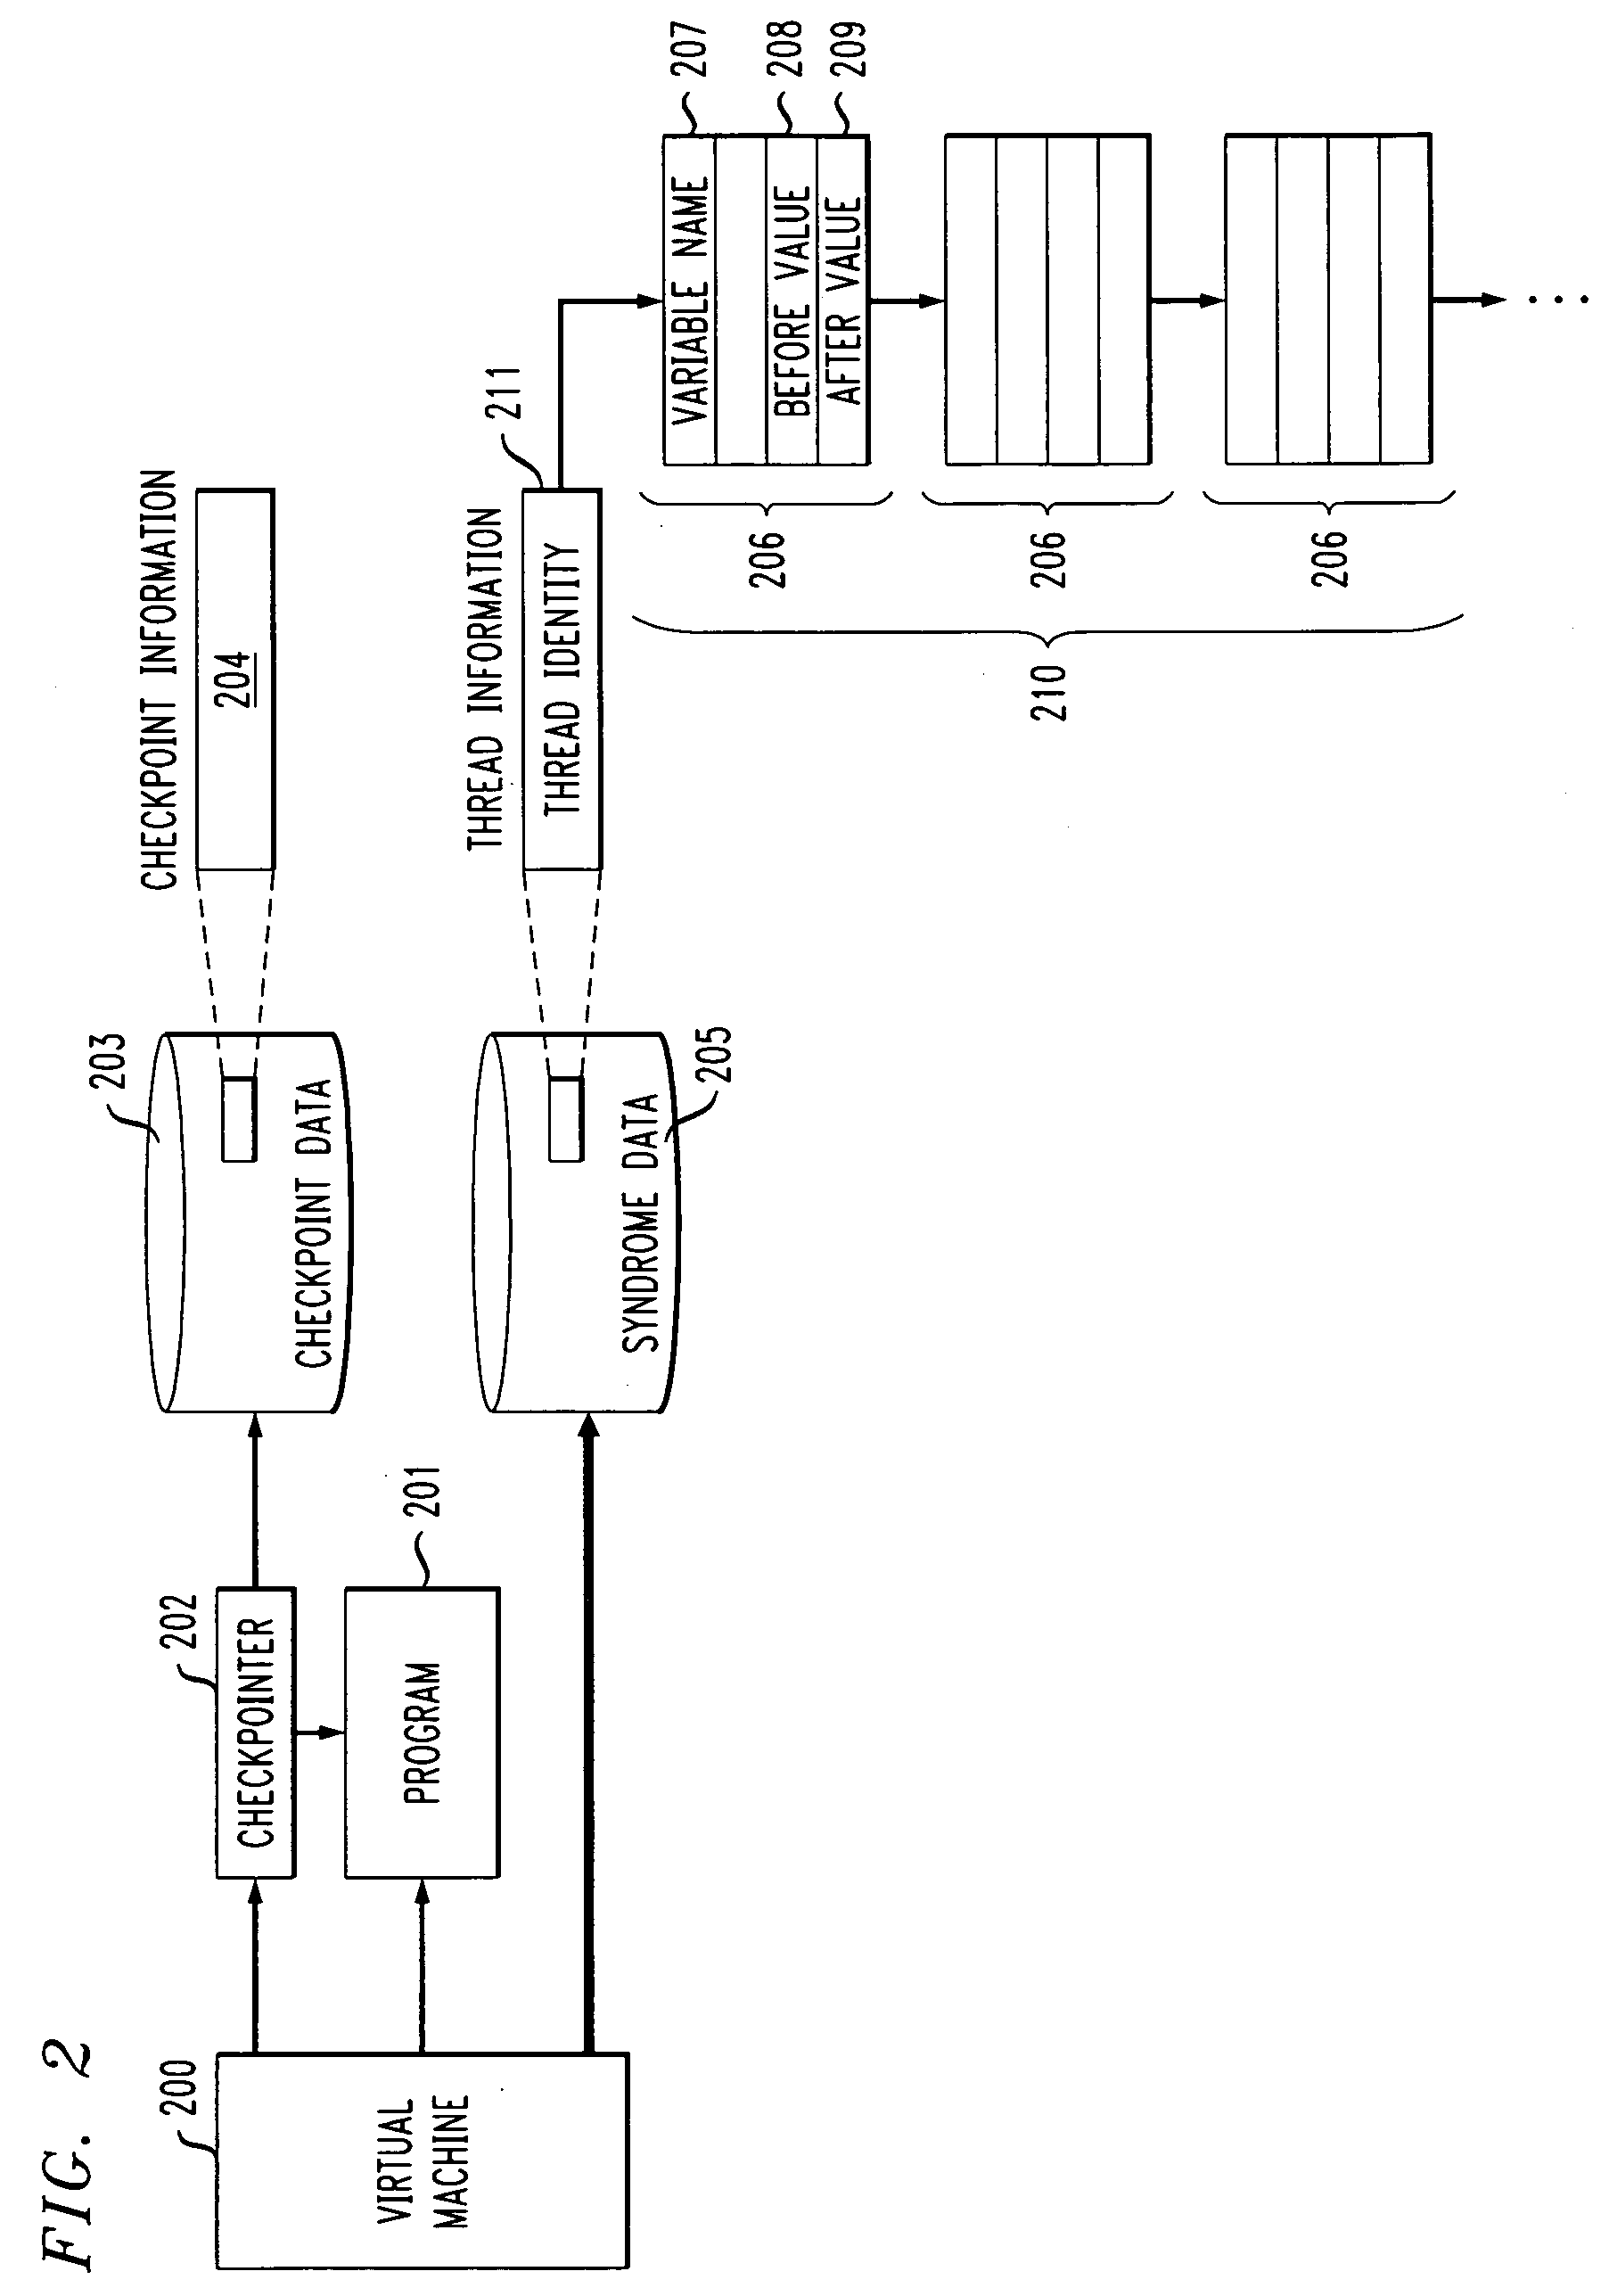 Method and apparatus for non-deterministic incremental program replay using checkpoints and syndrome tracking